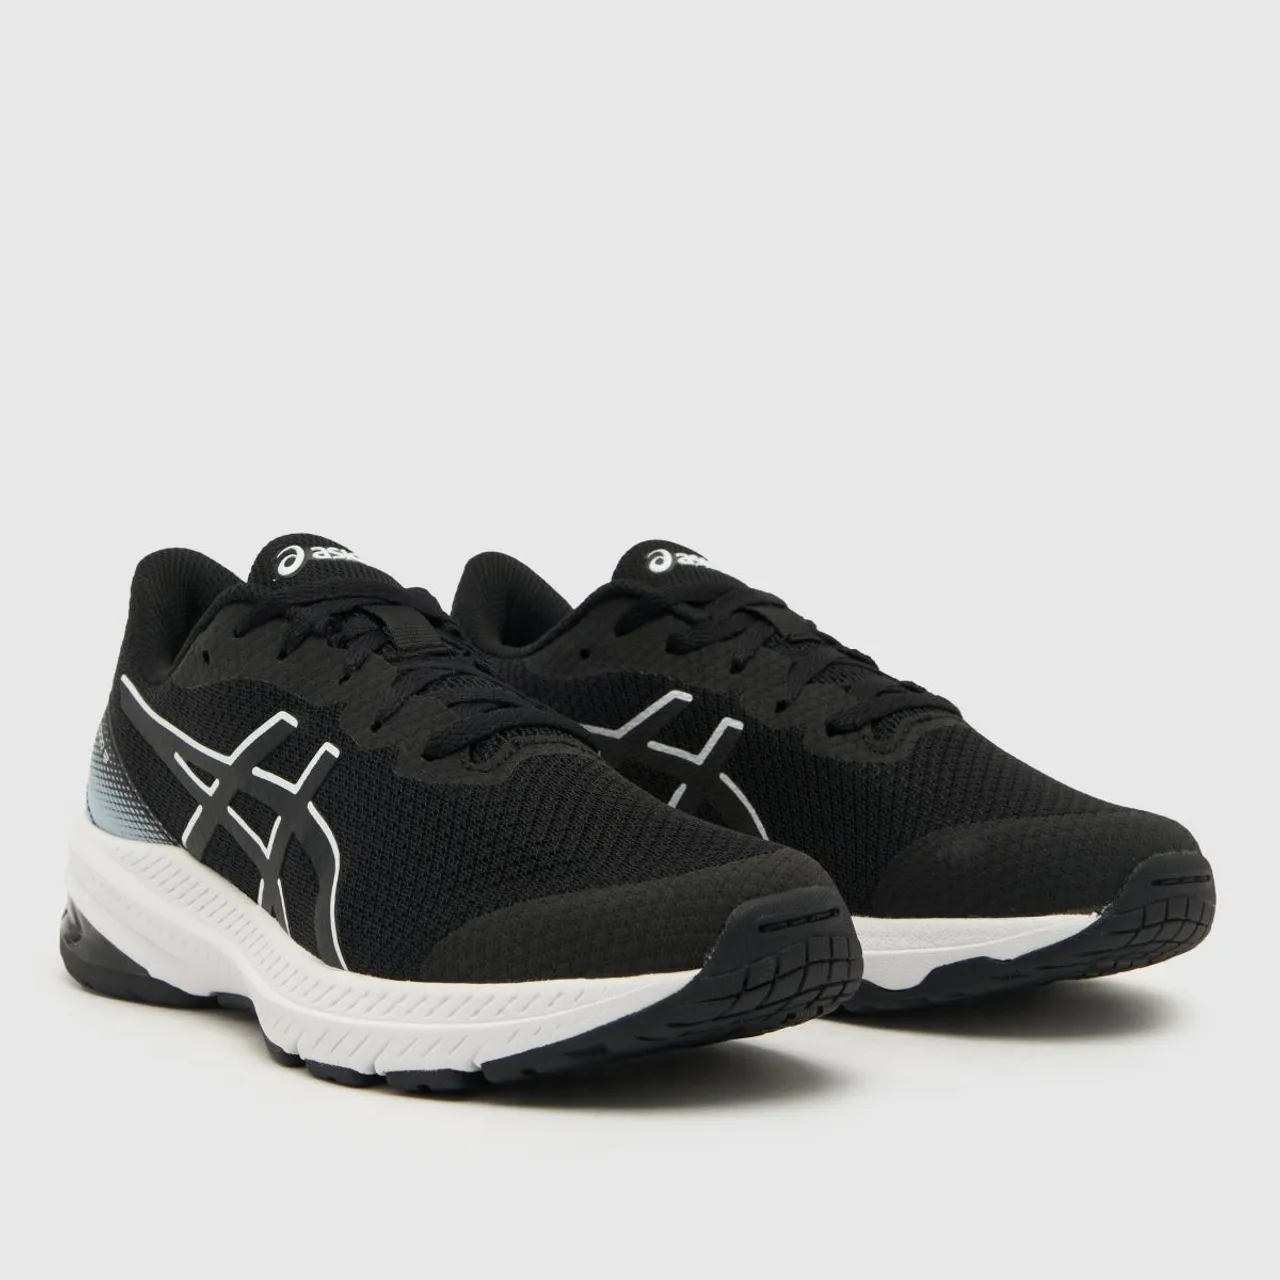 Asics Black & White Gt 1000 12 Youth Trainers